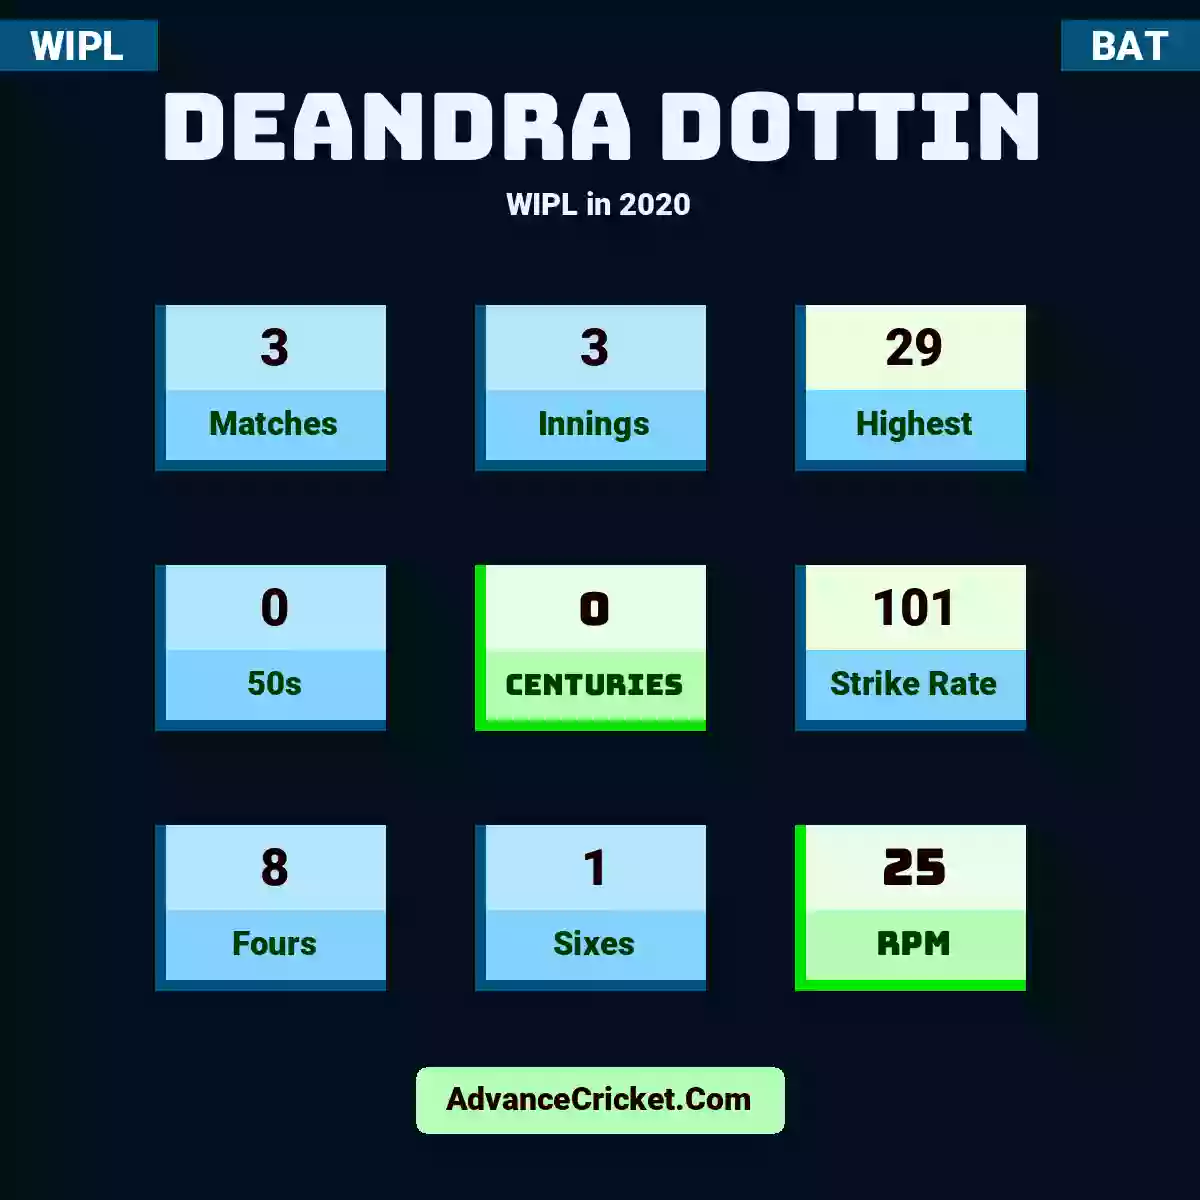 Deandra Dottin WIPL  in 2020, Deandra Dottin played 3 matches, scored 29 runs as highest, 0 half-centuries, and 0 centuries, with a strike rate of 101. D.Dottin hit 8 fours and 1 sixes, with an RPM of 25.